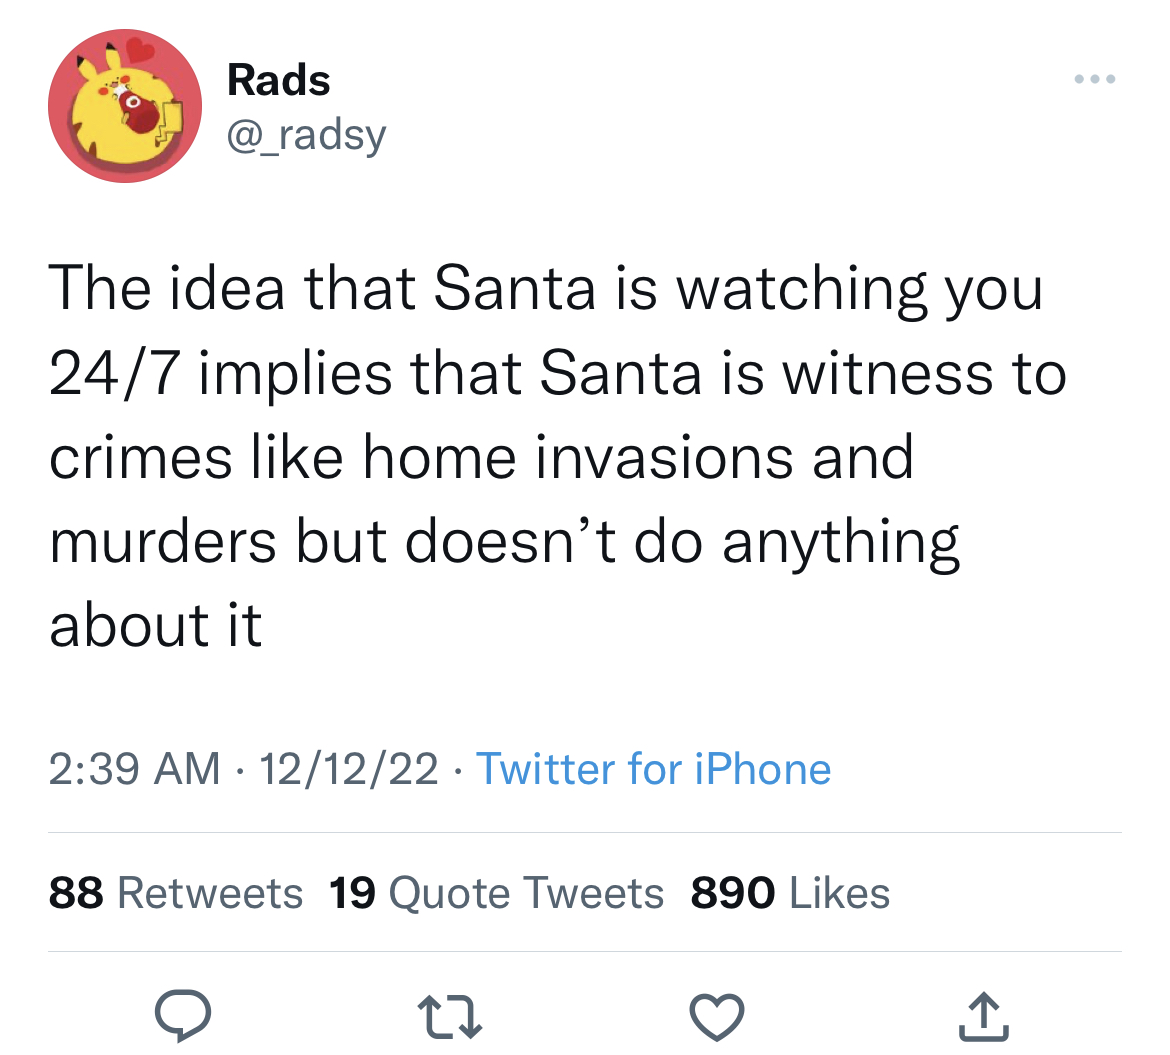 Tweets roasting celebs - Funny meme - Rads The idea that Santa is watching you 247 implies that Santa is witness to crimes home invasions and murders but doesn't do anything about it 121222 Twitter for iPhone 88 19 Quote Tweets 890 22